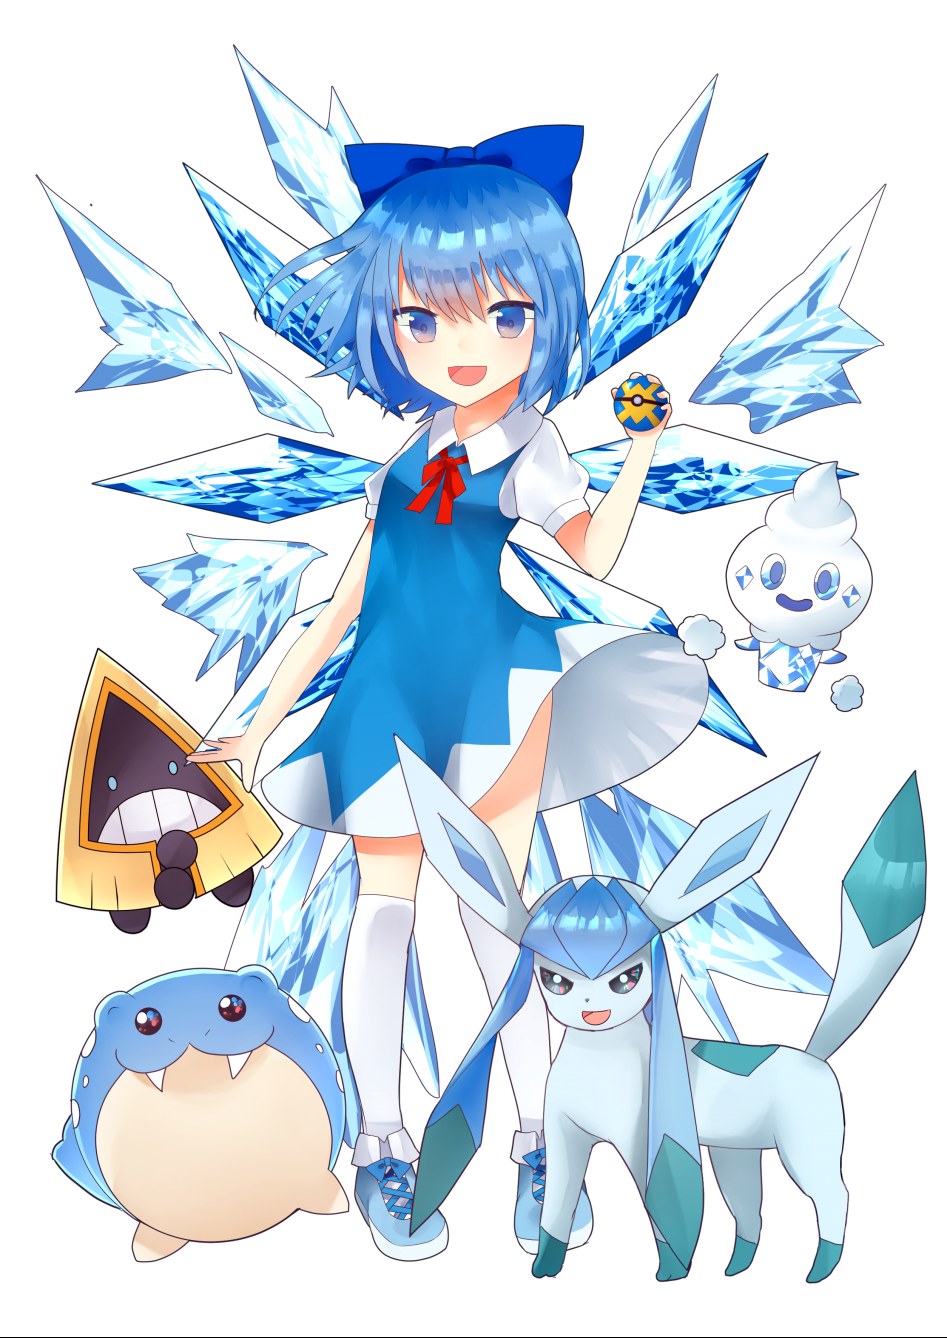 __cirno_glaceon_snorunt_spheal_and_vanillish_pokemon_and_touhou_drawn_by_sakipsakip__8a81680d9ebee2cc29c1852bfca8b140.png